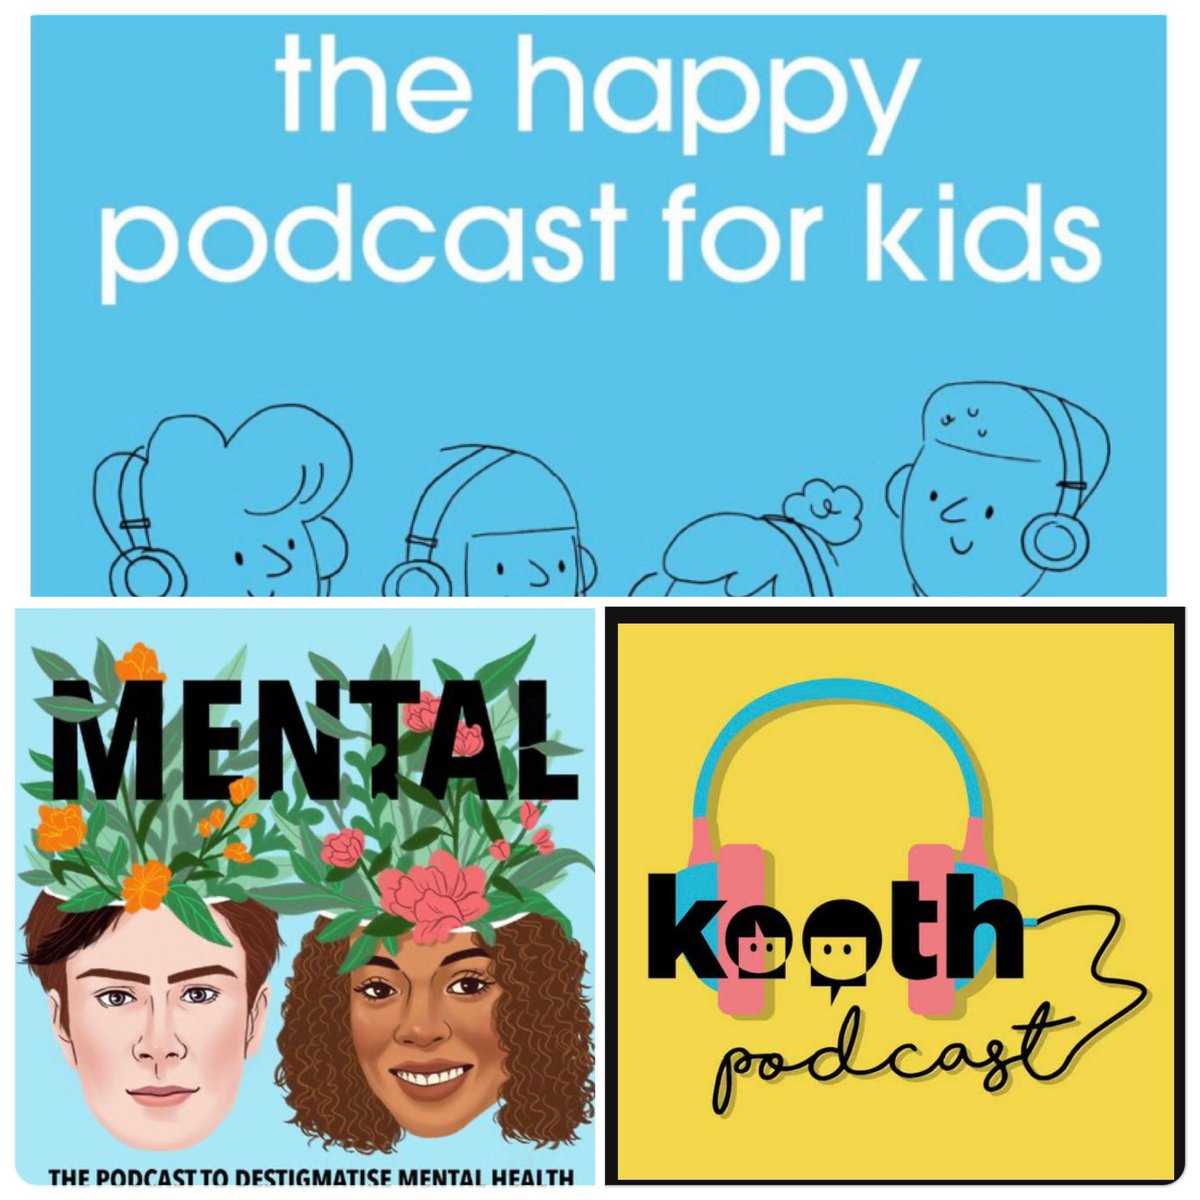 Here are some suggestions for #WellbeingReads and #Podcasts for #MentalHealthAwarenessWeek